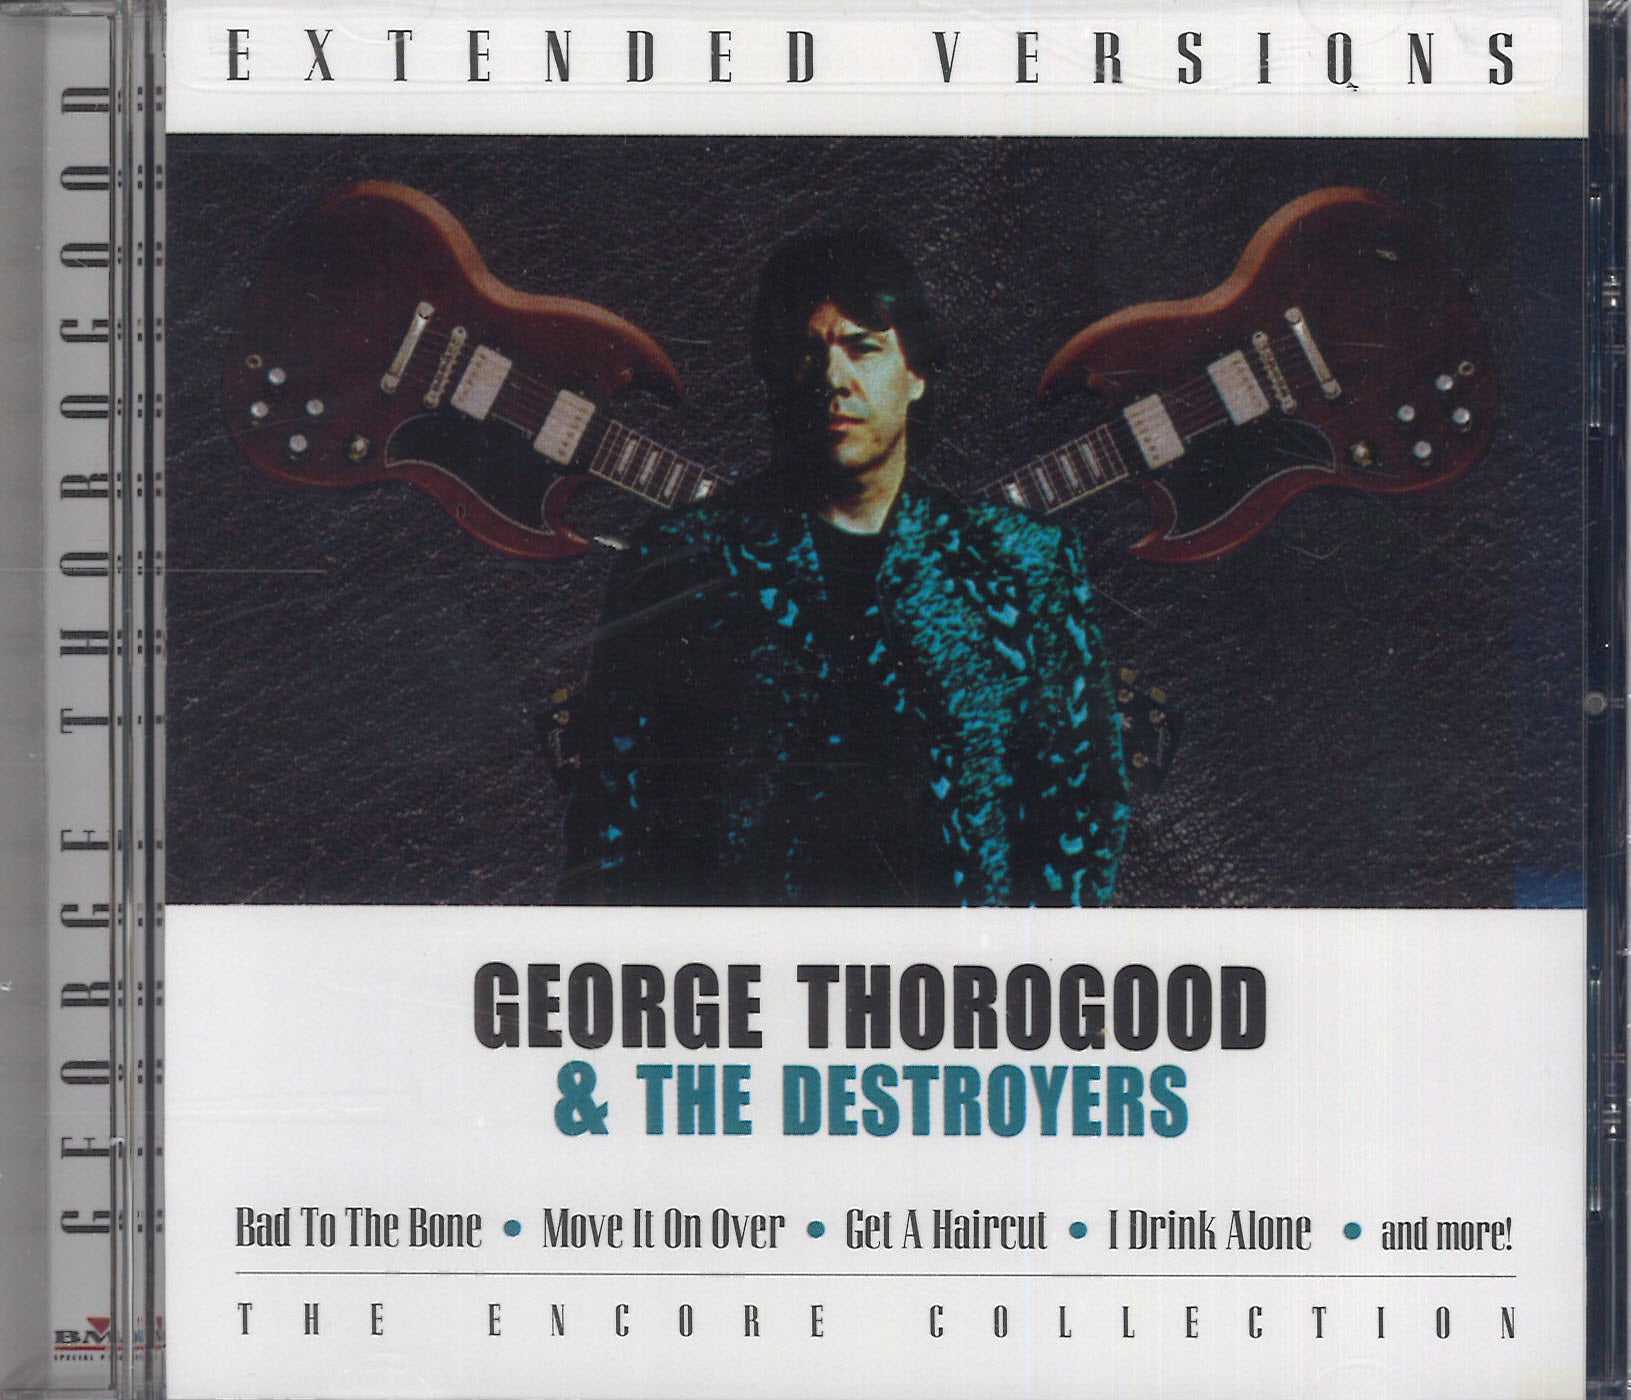 George Thorogood & The Destroyers Extended Versions